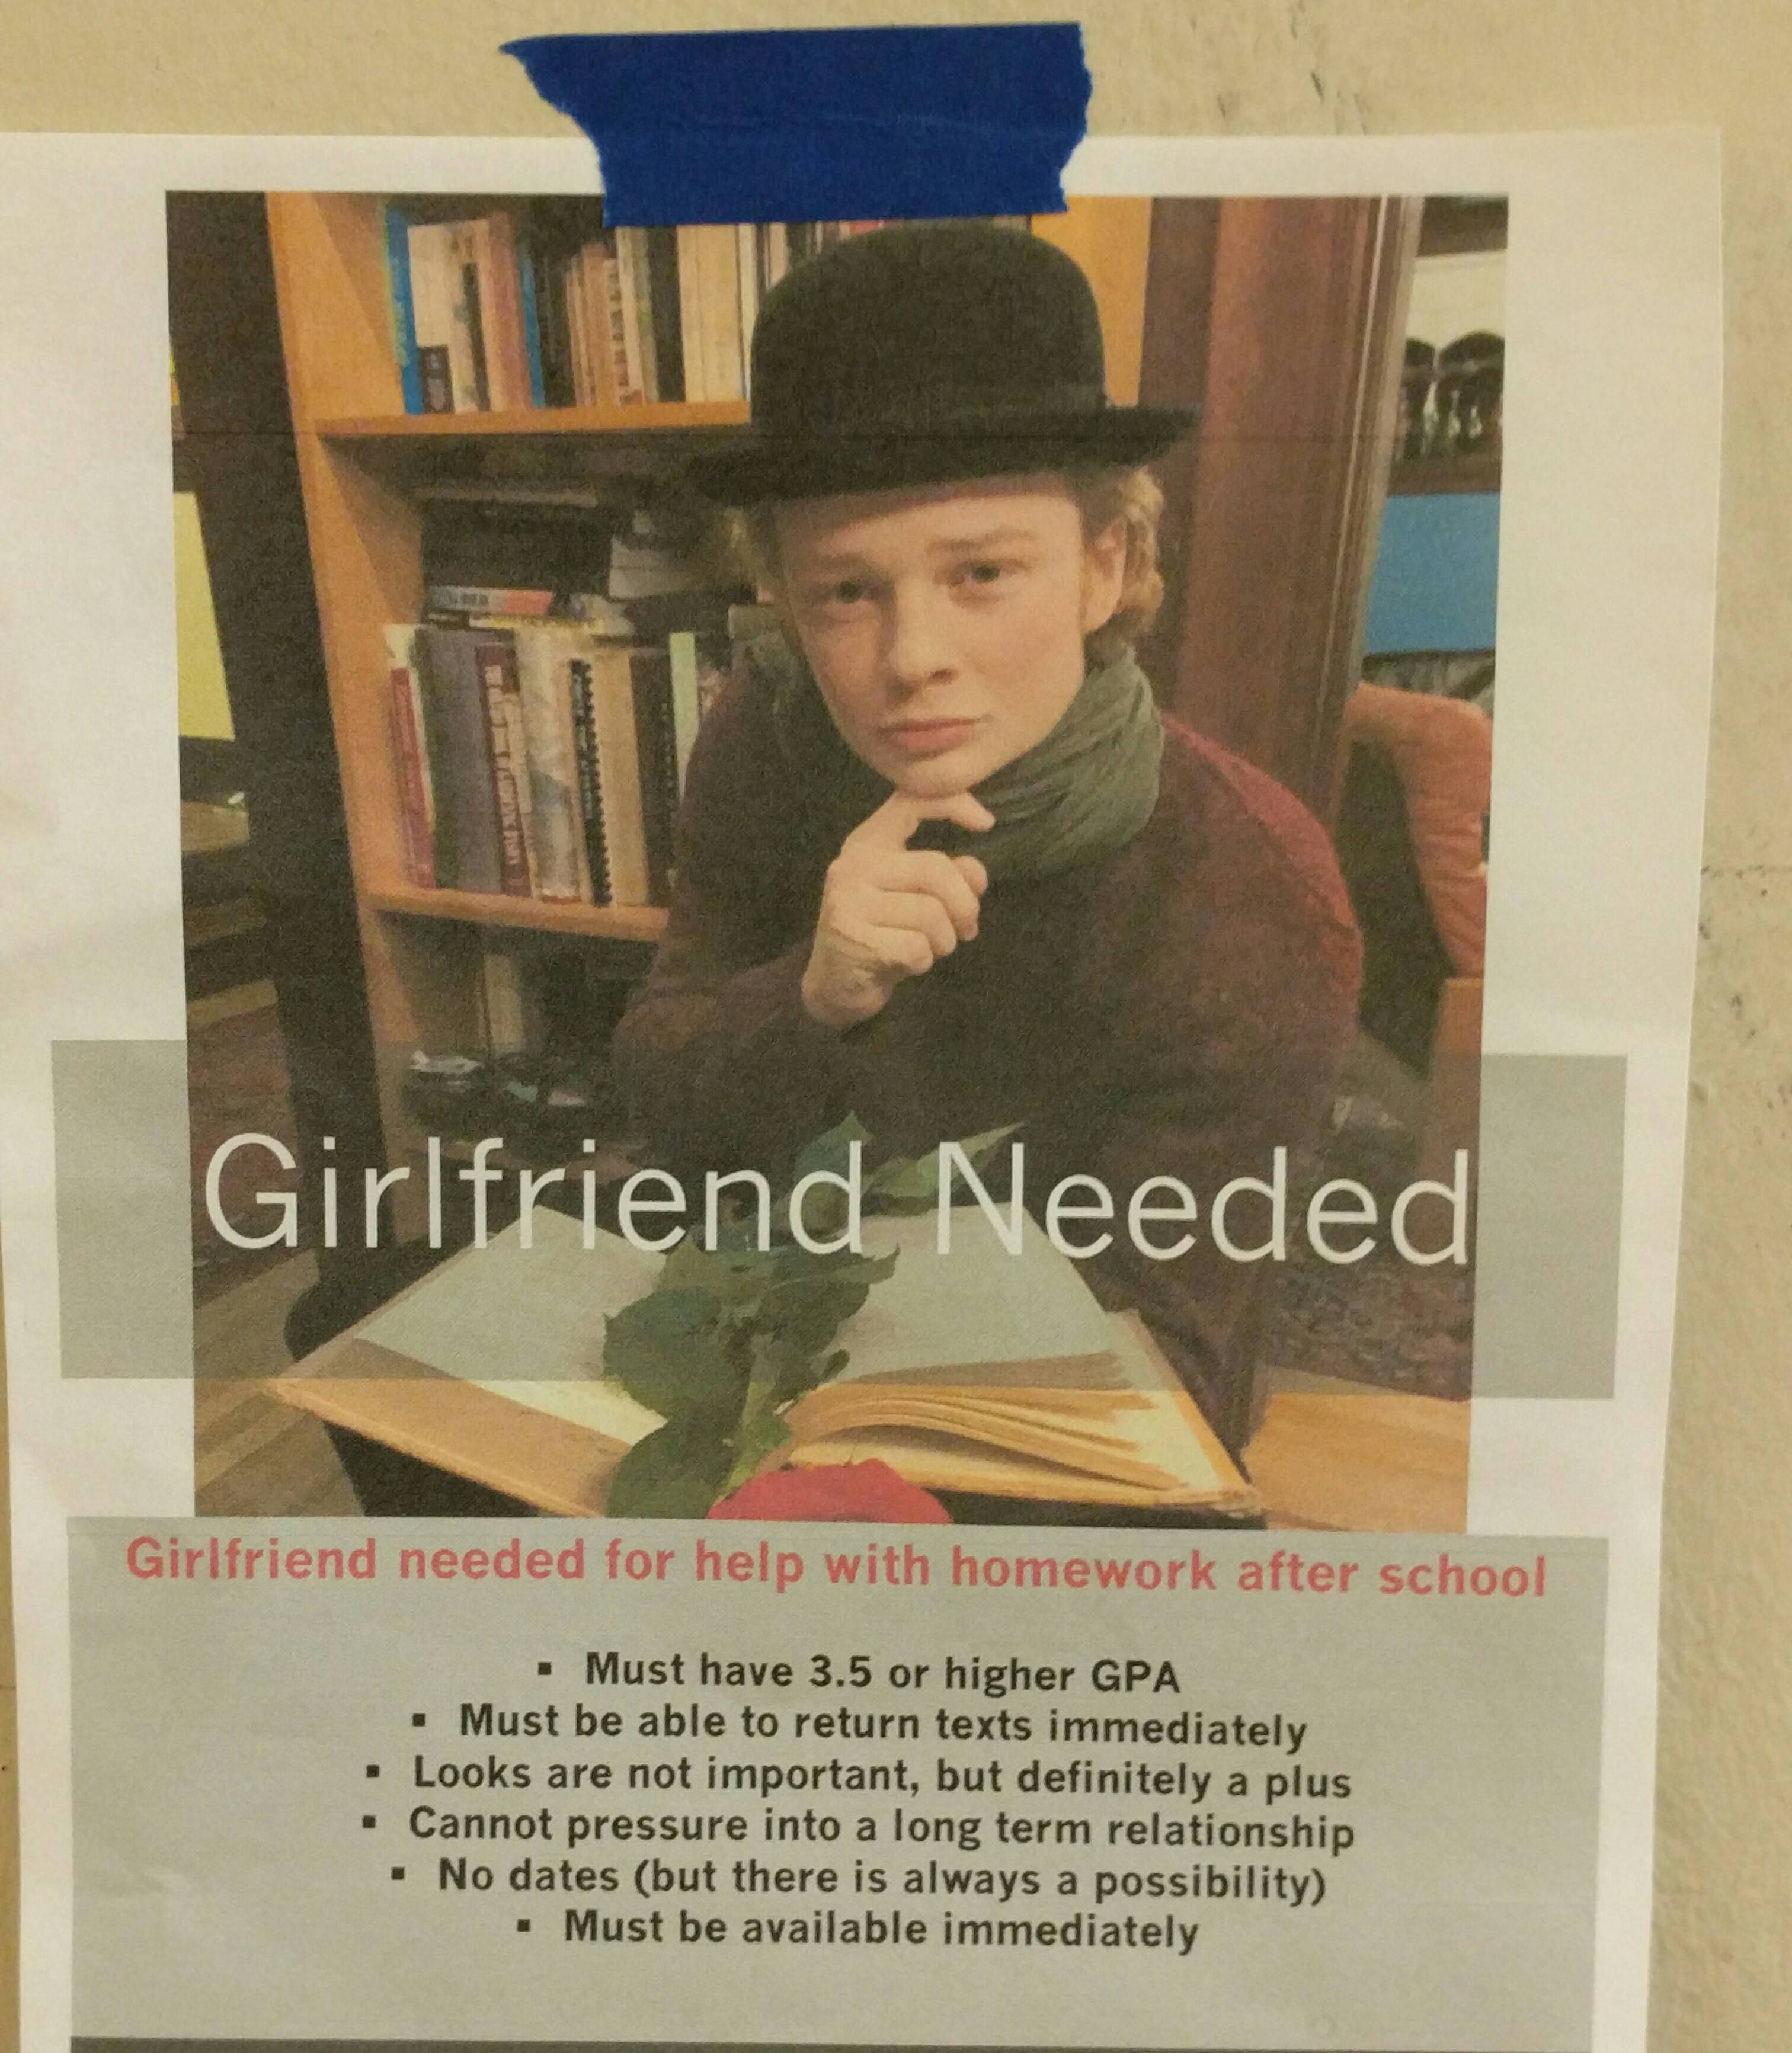 poster - Girlfriend Needed Girlfriend needed for help with homework after school . Must have 3.5 or higher Gpa . Must be able to return texts immediately . Looks are not important, but definitely a plus Cannot pressure into a long term relationship No dat